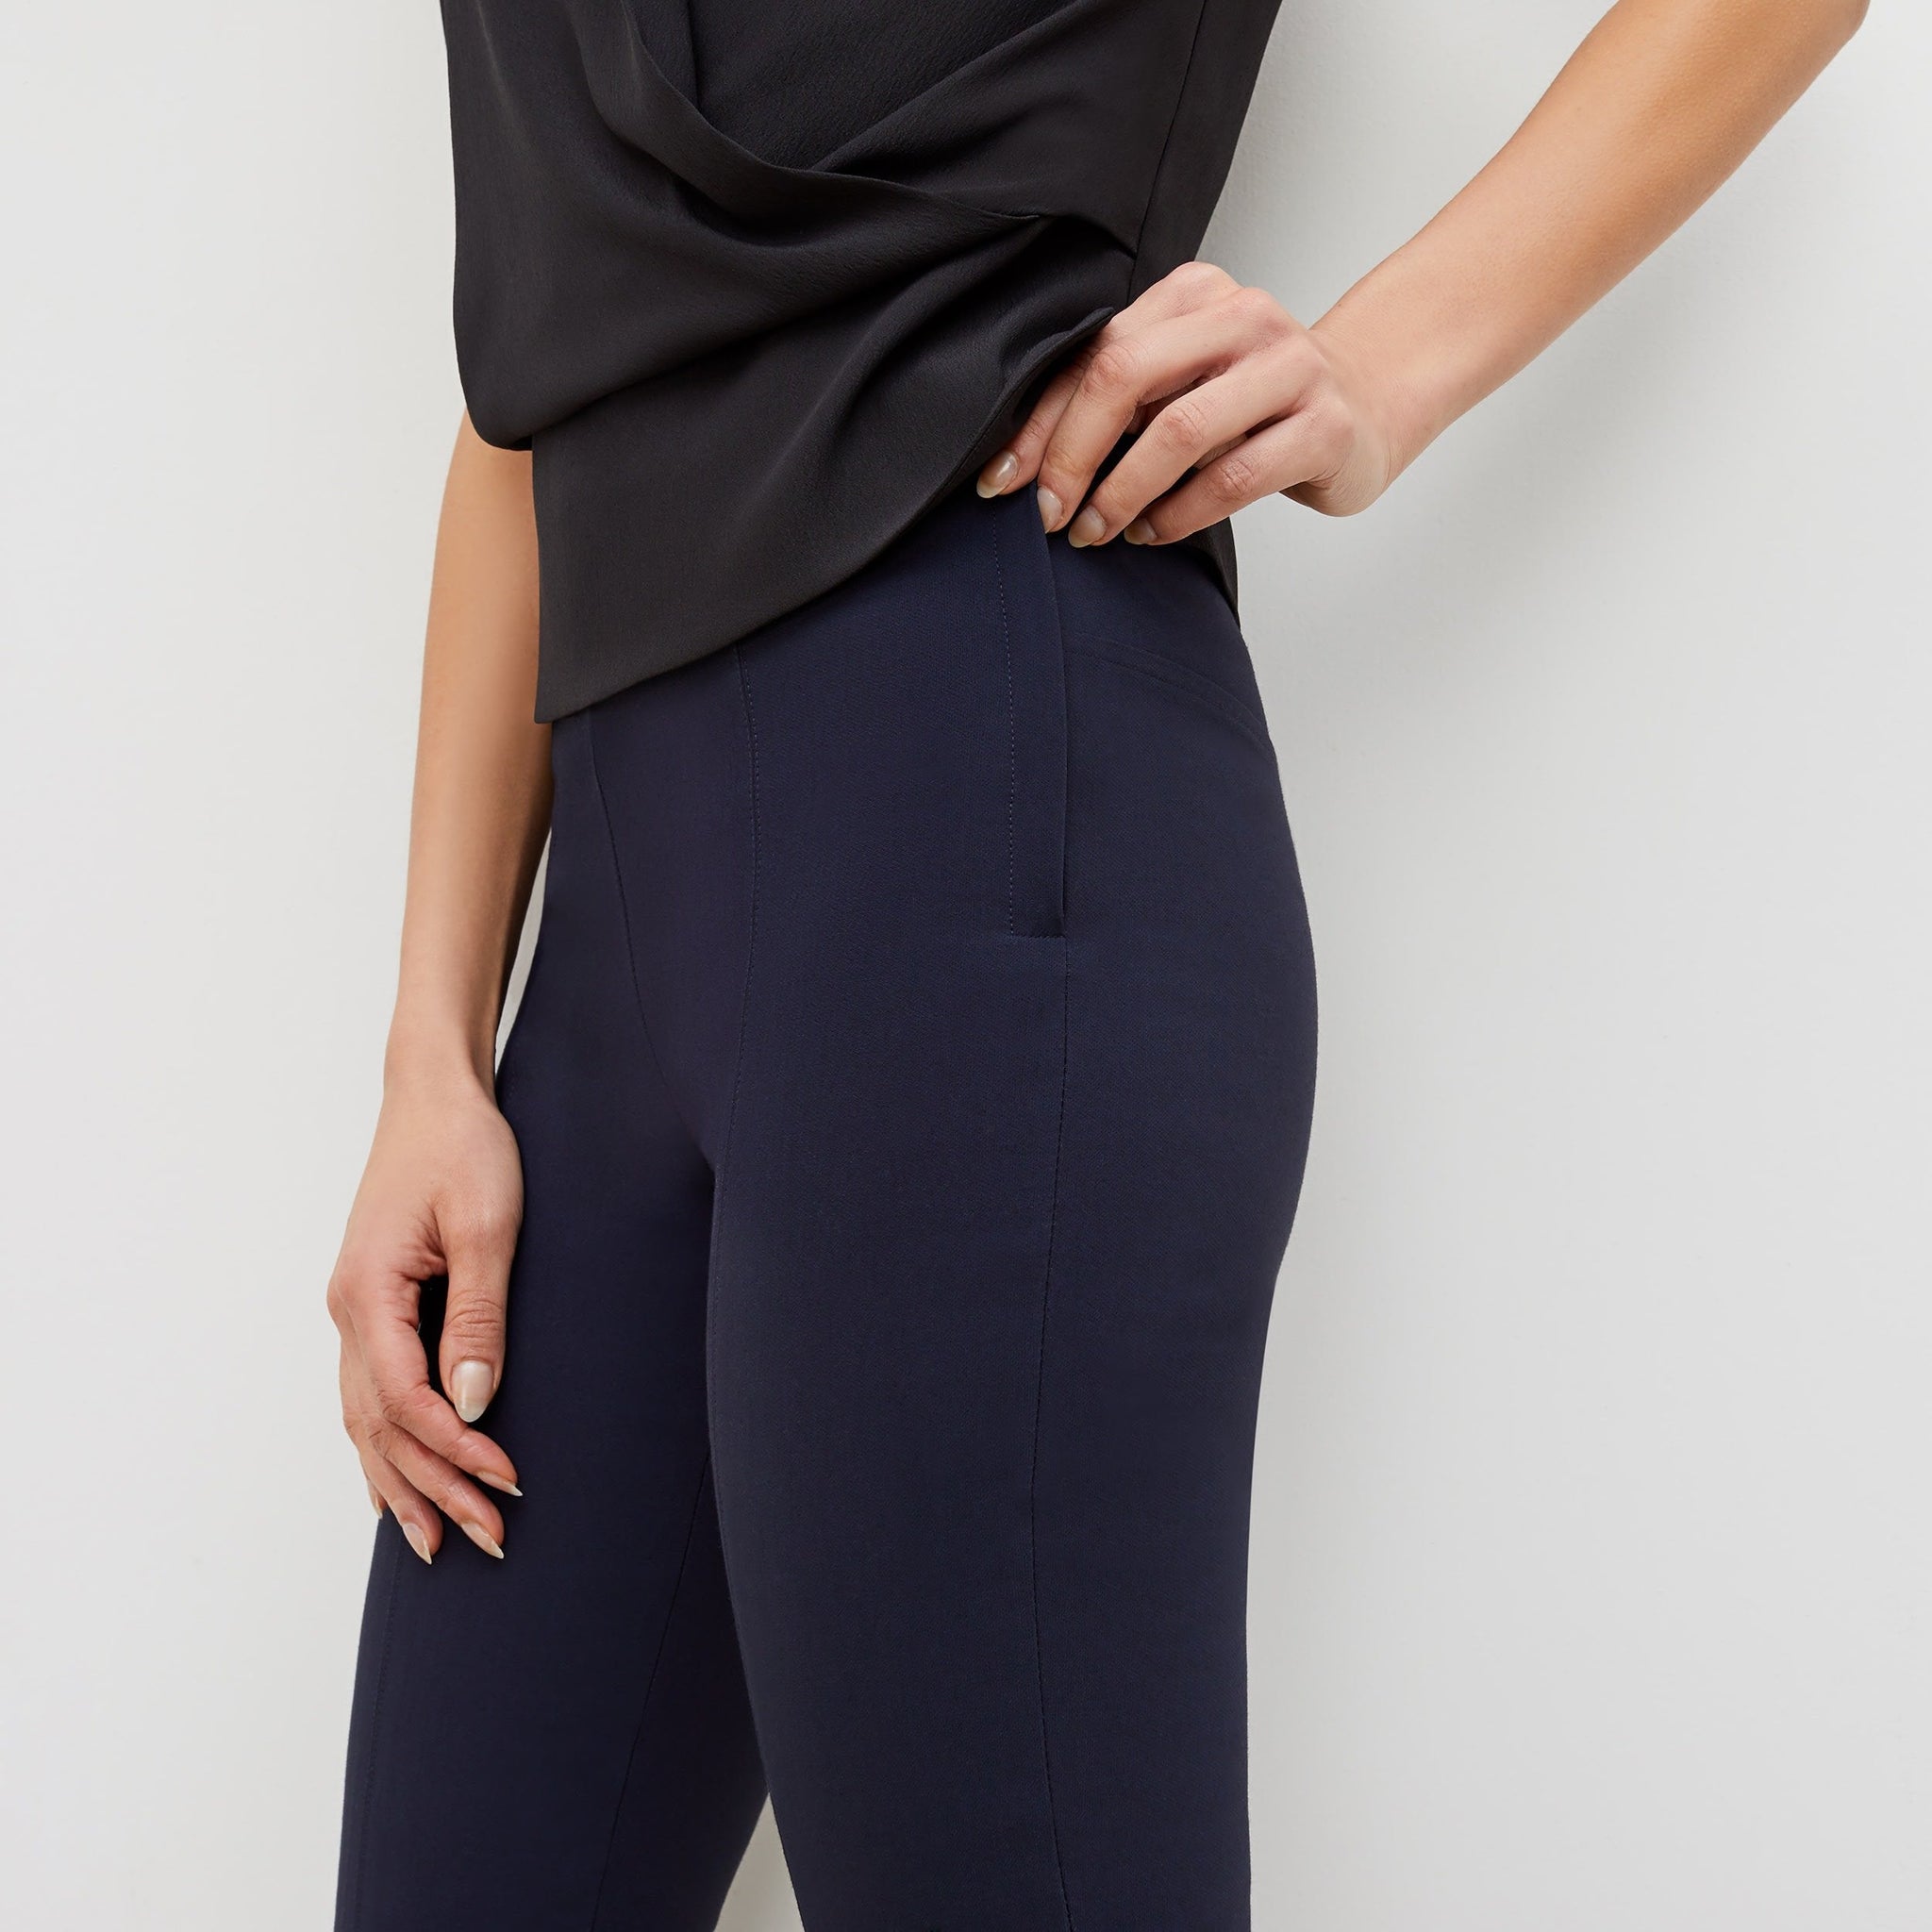 Side image of a woman standing wearing the foster pant in dark navy